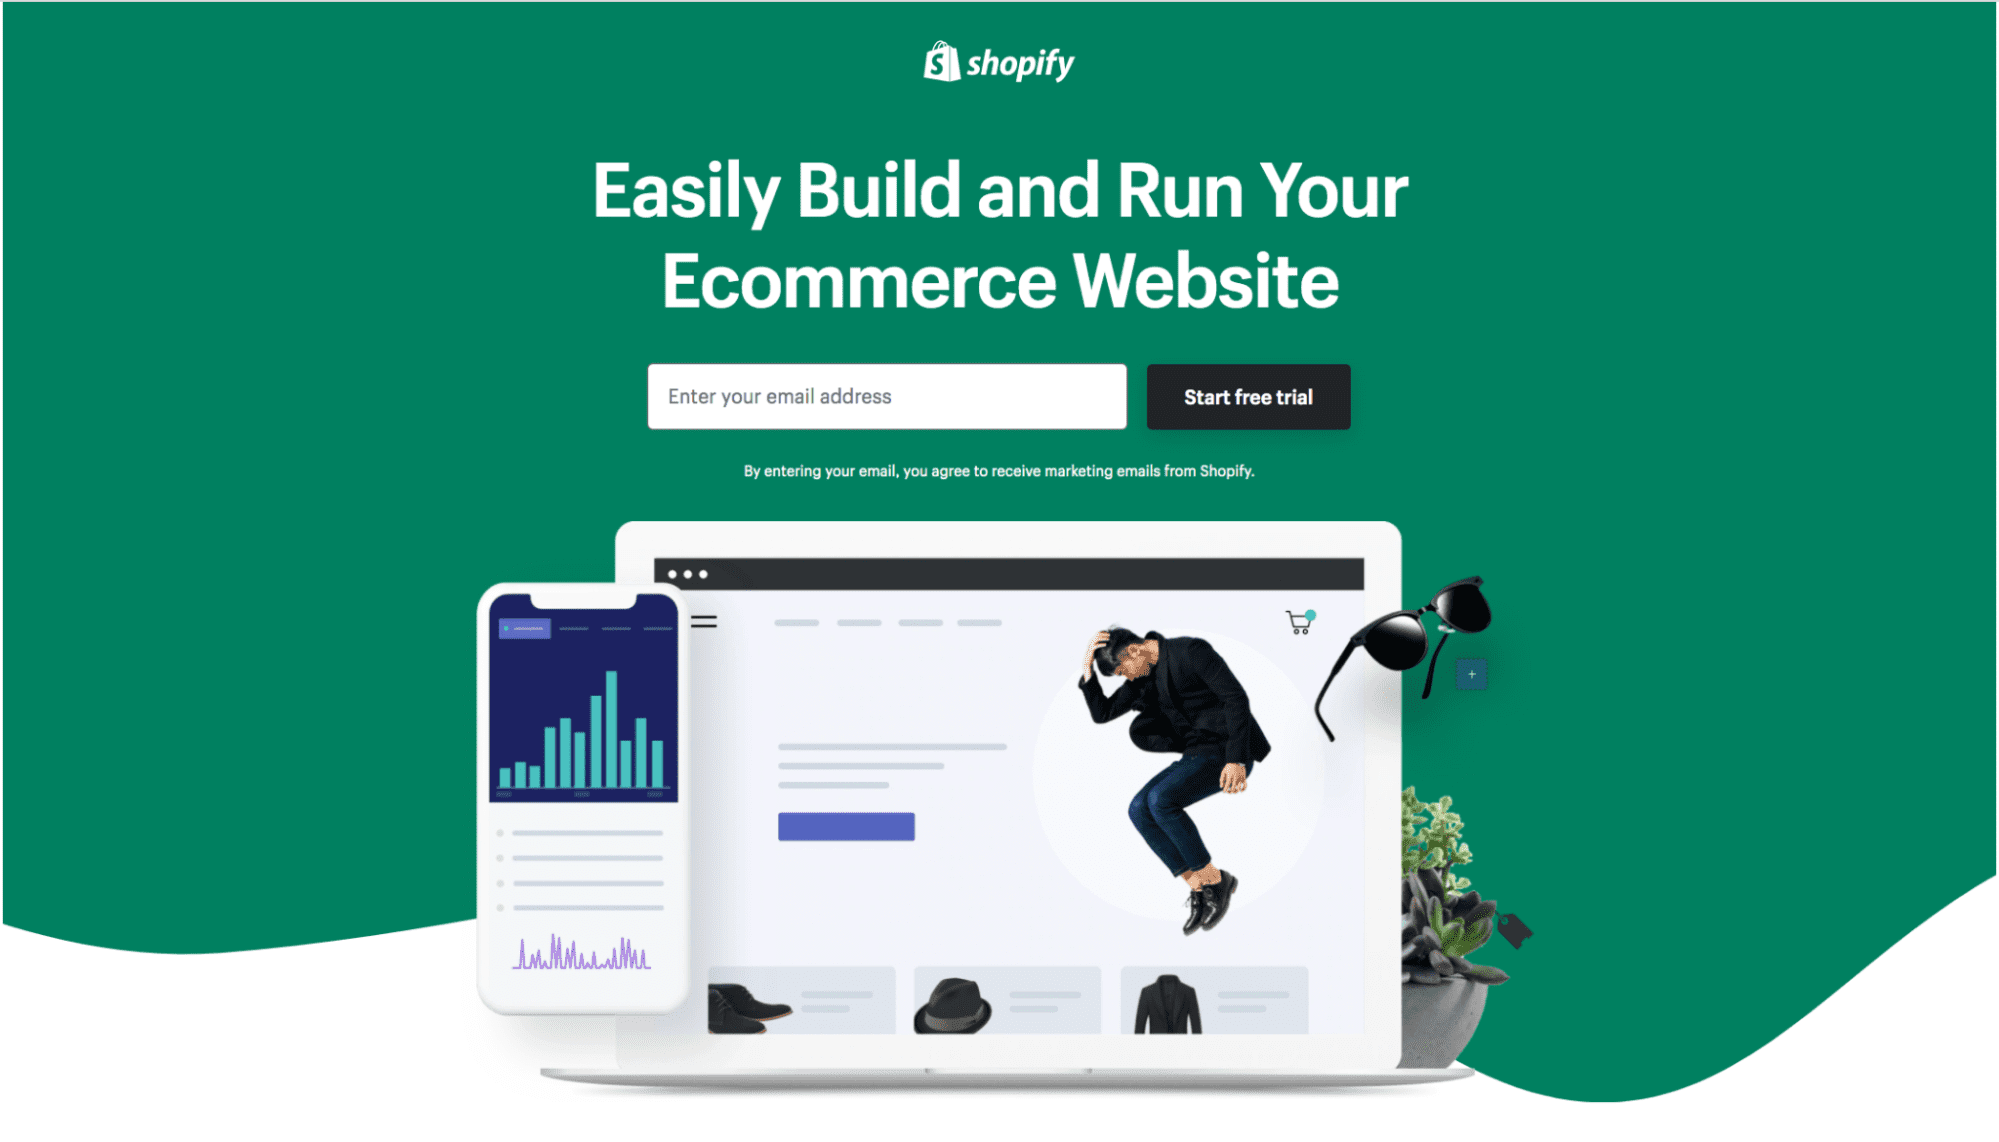 landing page from Shopify